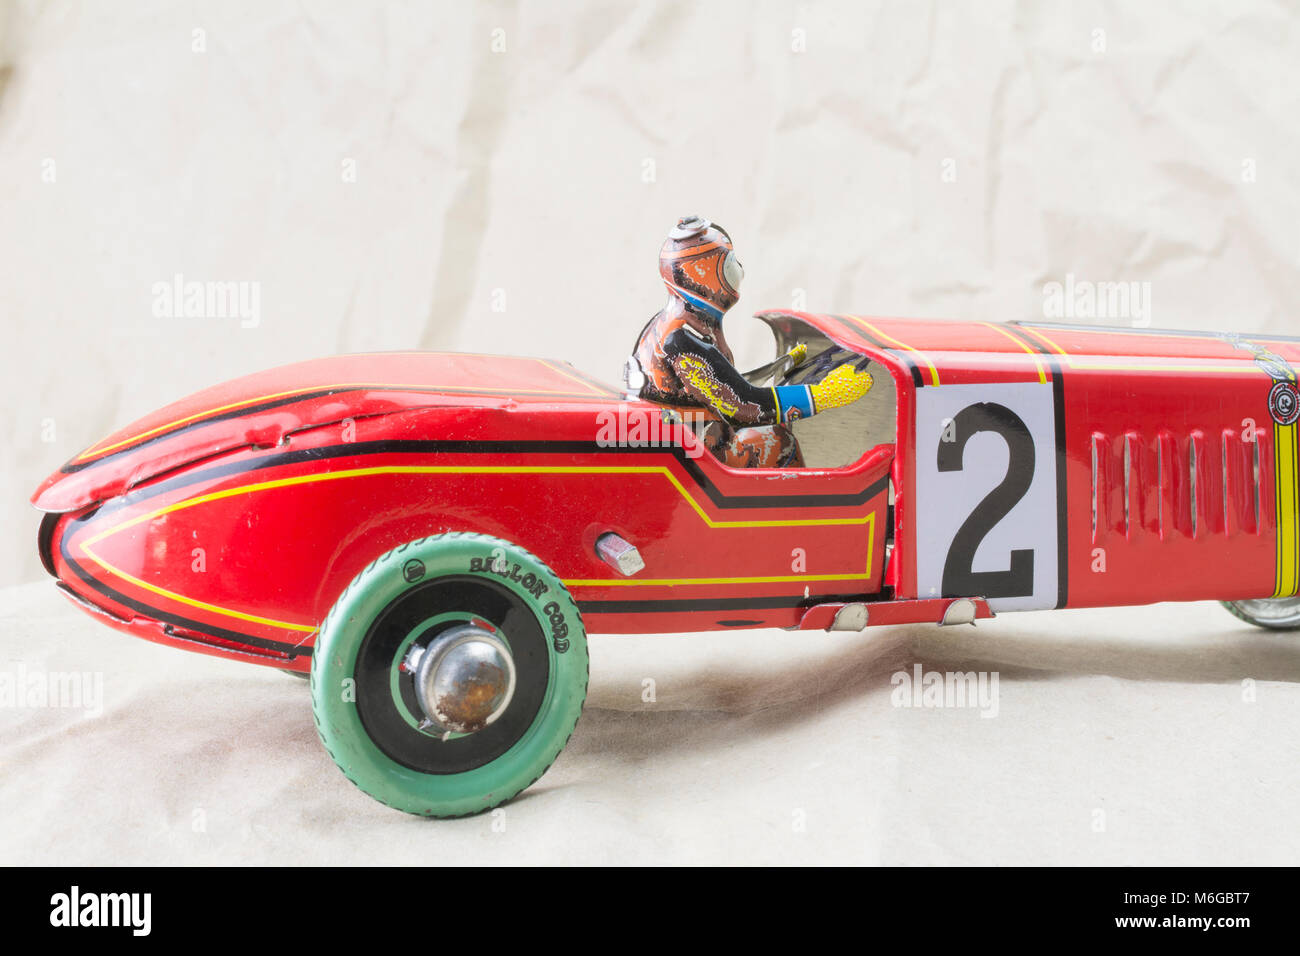 MagiDeal Vintage Wind-up Red Racer Race Car Toy